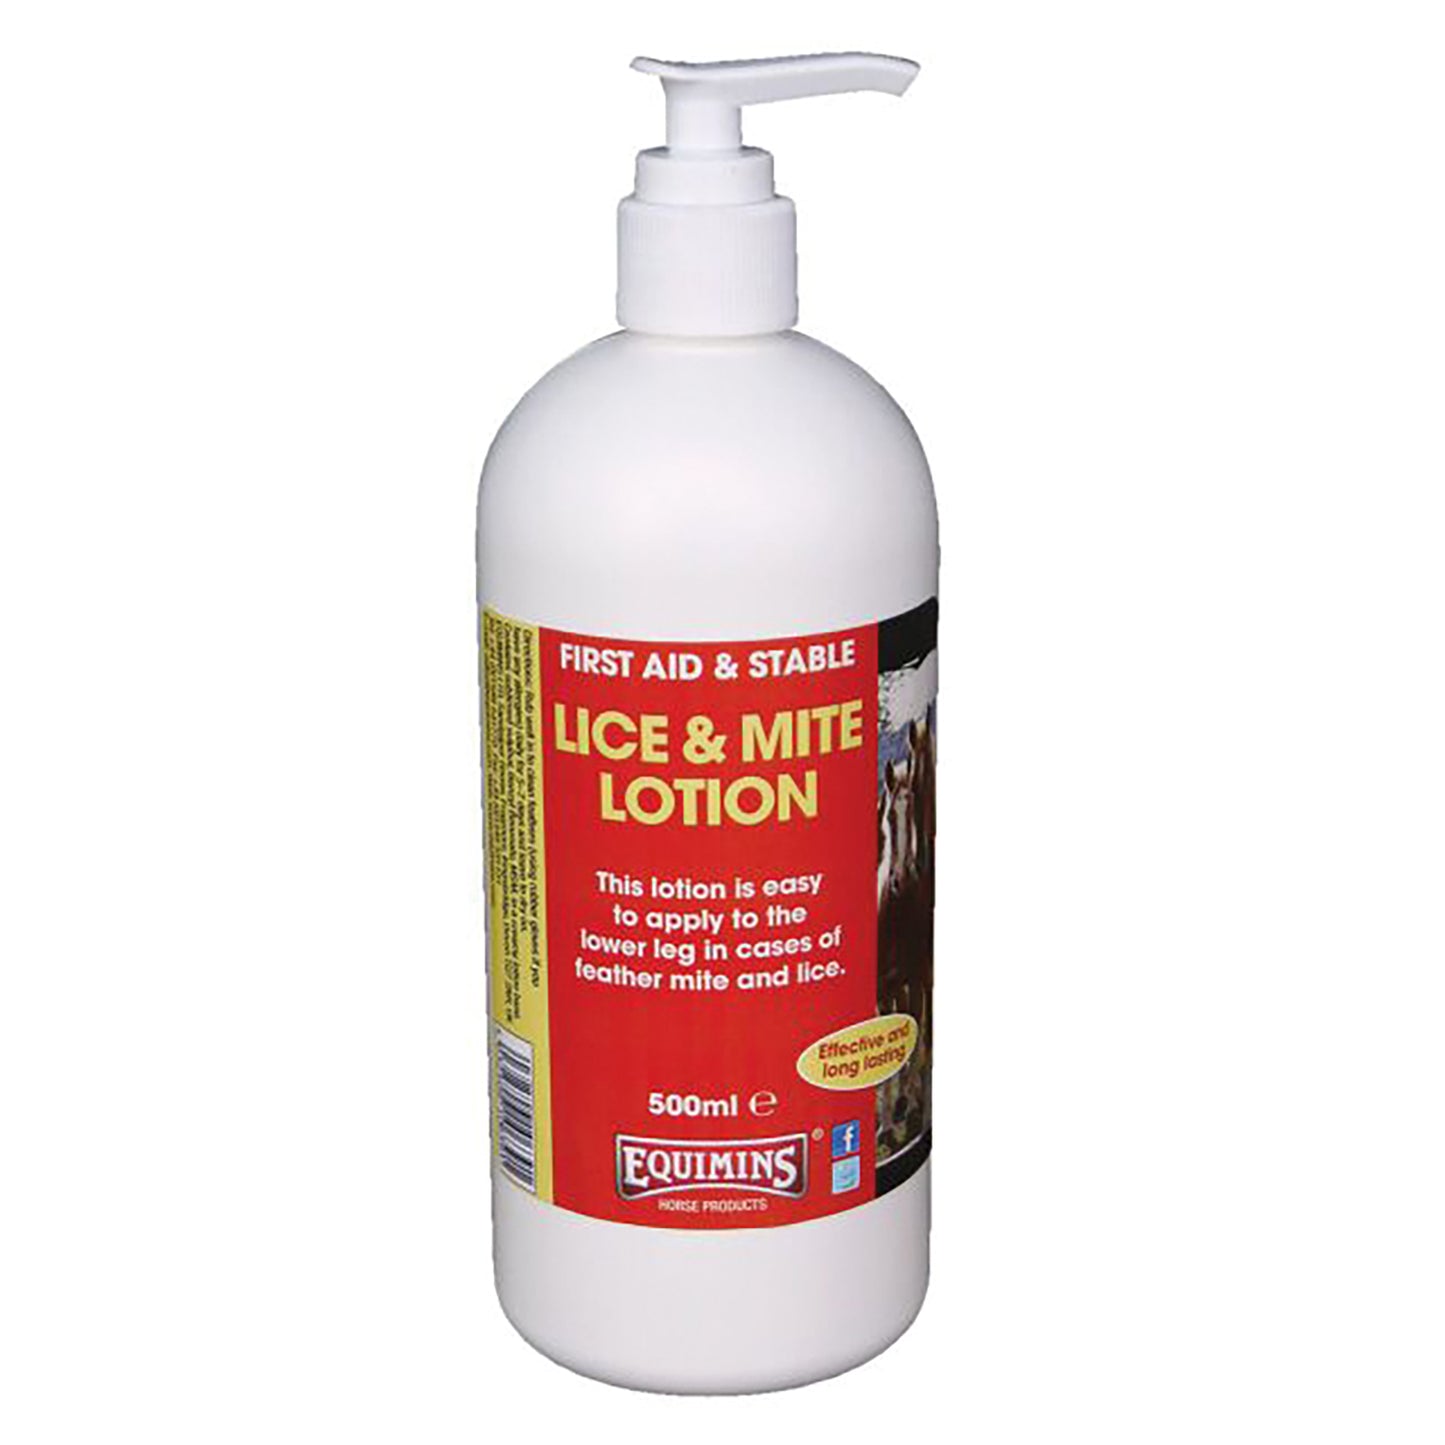 Equimins Lice & Mite Lotion